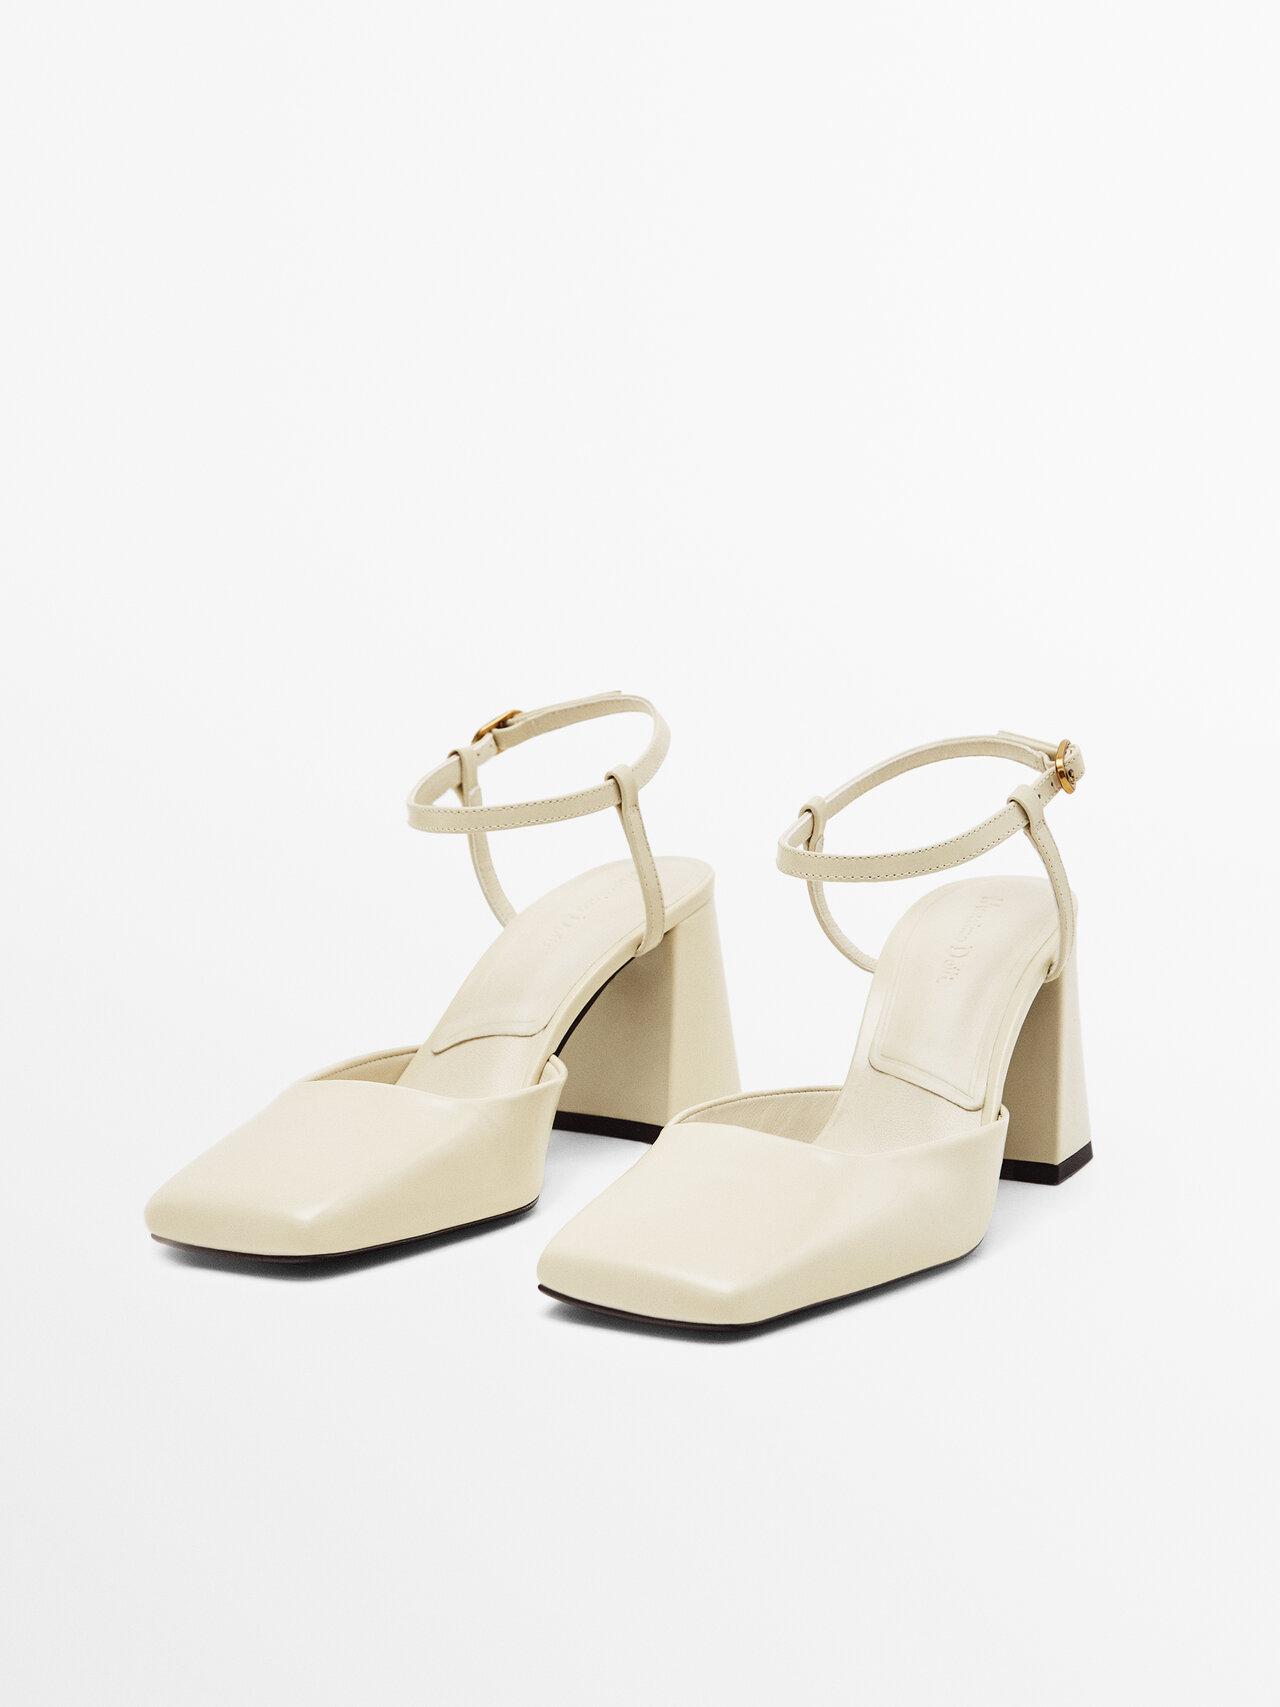 MASSIMO DUTTI High-heel Leather Shoes With Square Toe in Natural | Lyst